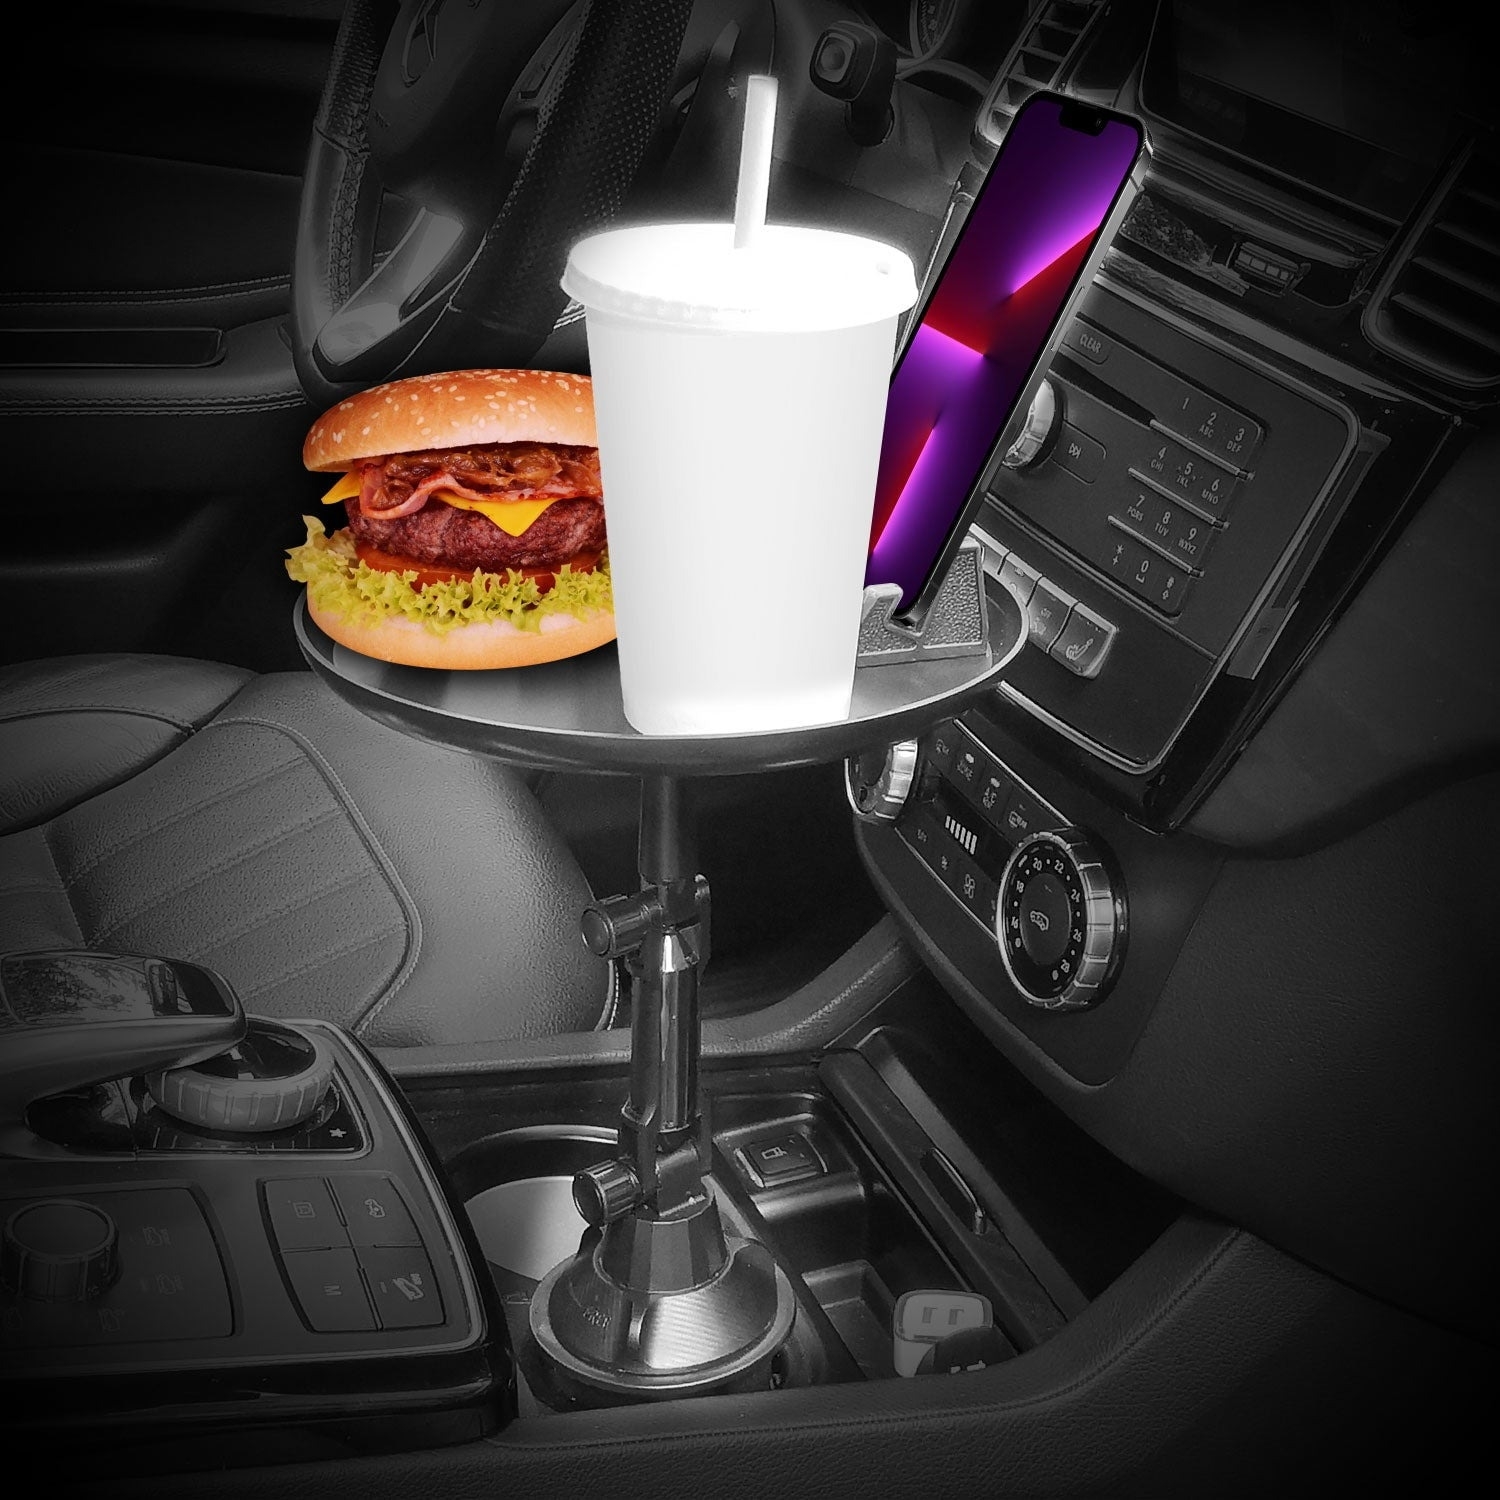 Food sits on a tray in a supholder